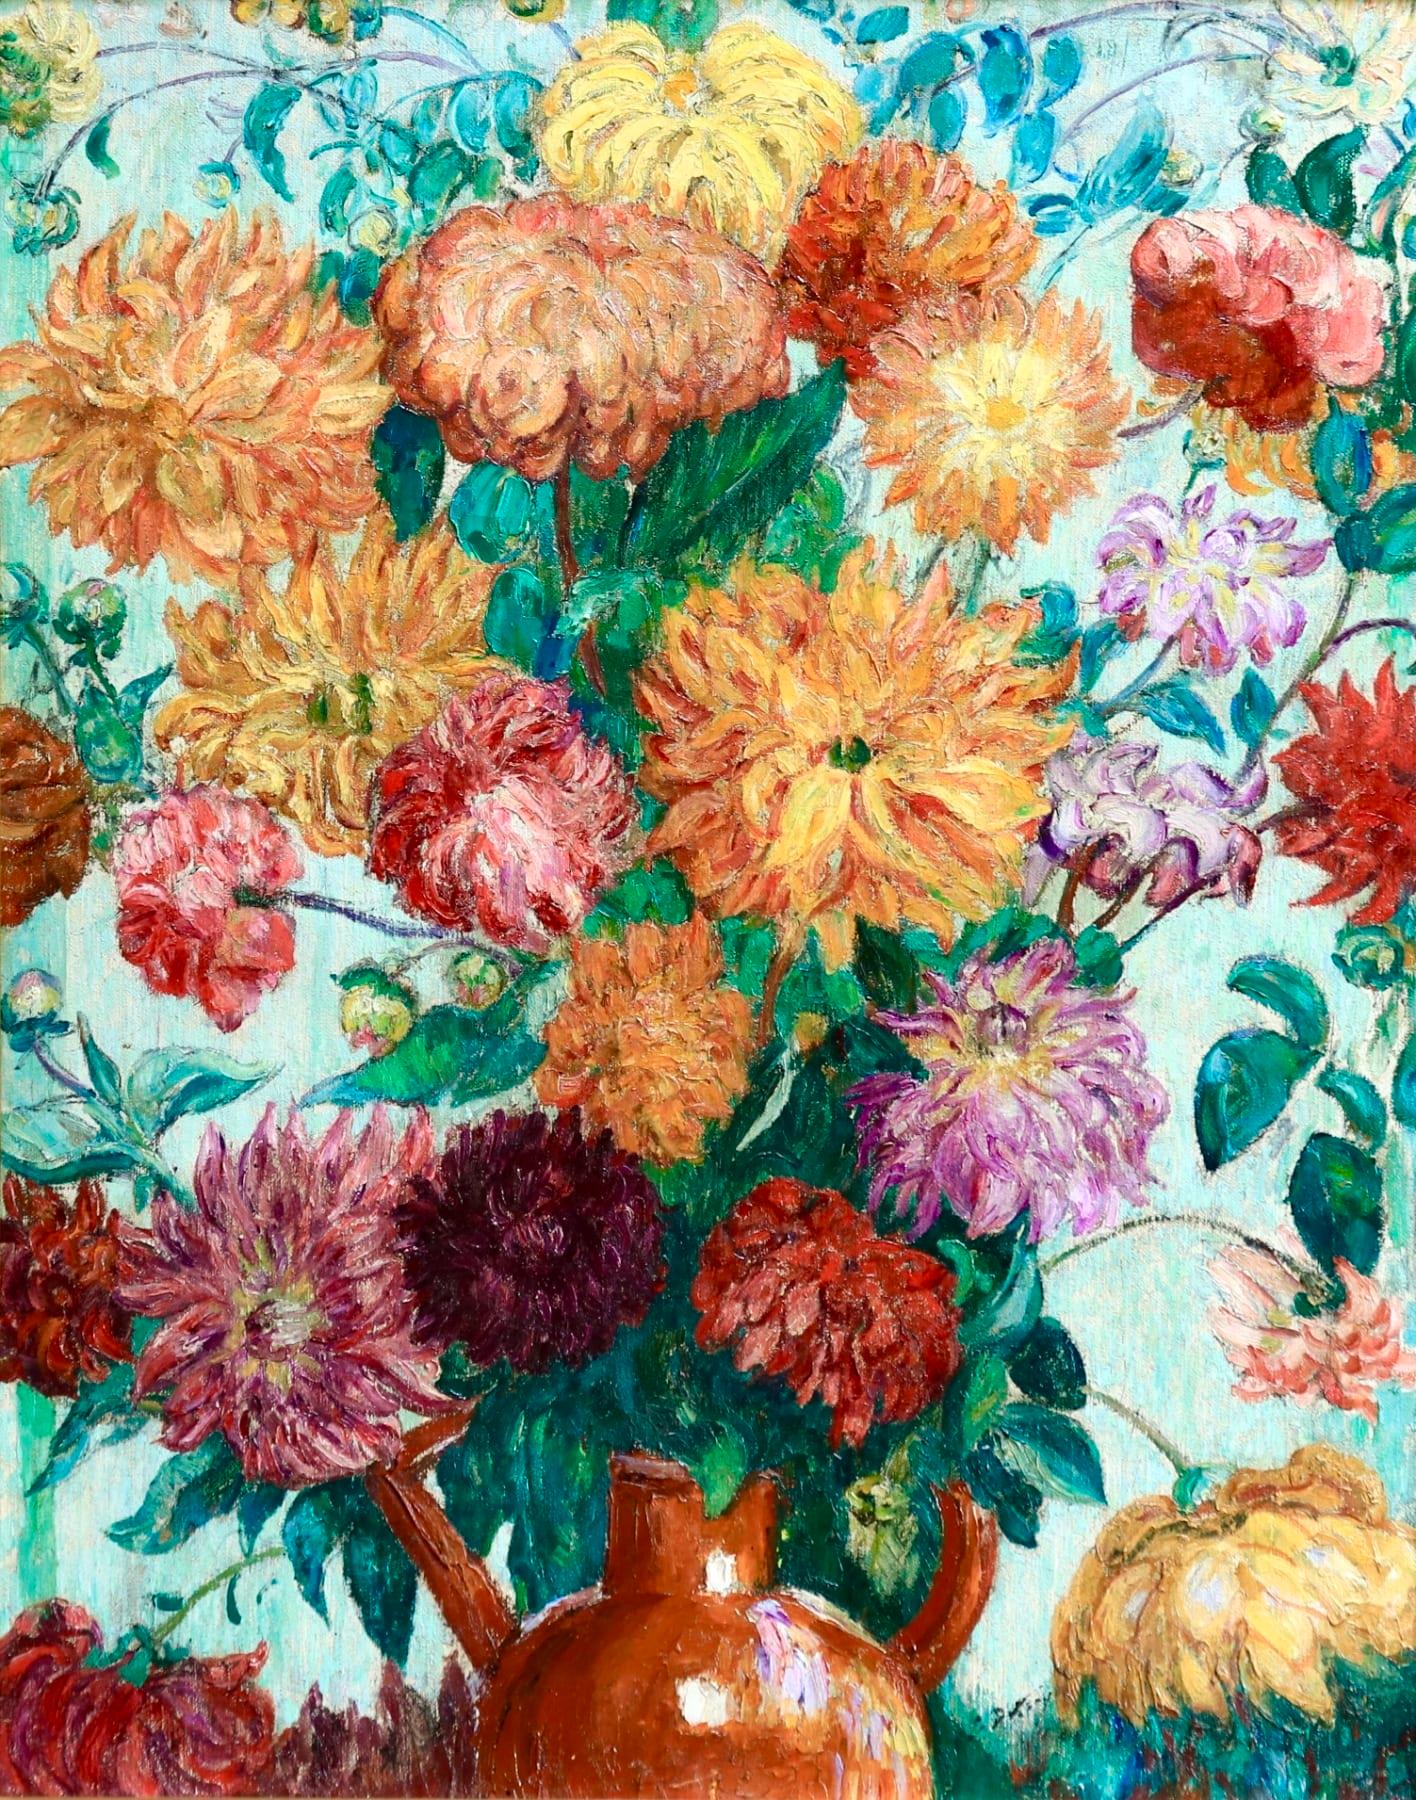 A beautifully coloured and painted oil on canvas by French post impressionist painter Leon Detroy depicting a vase of dahlias in yellows, oranges, reds and purples. Signed lower centre right.

Dimensions:
Framed: 43"x36"
Unframed: